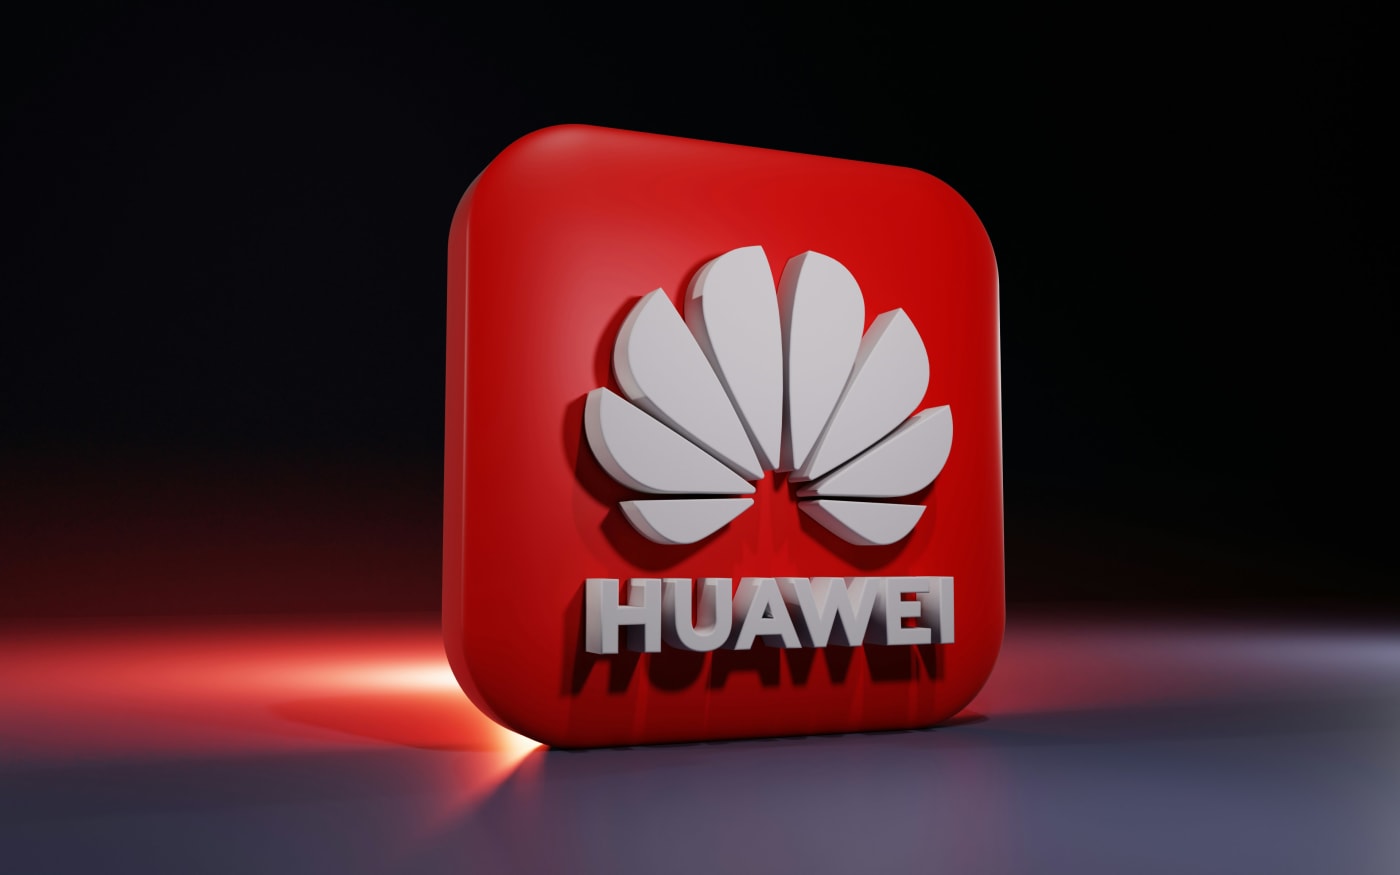 Huawei has been secretly funding research in America after being blacklisted